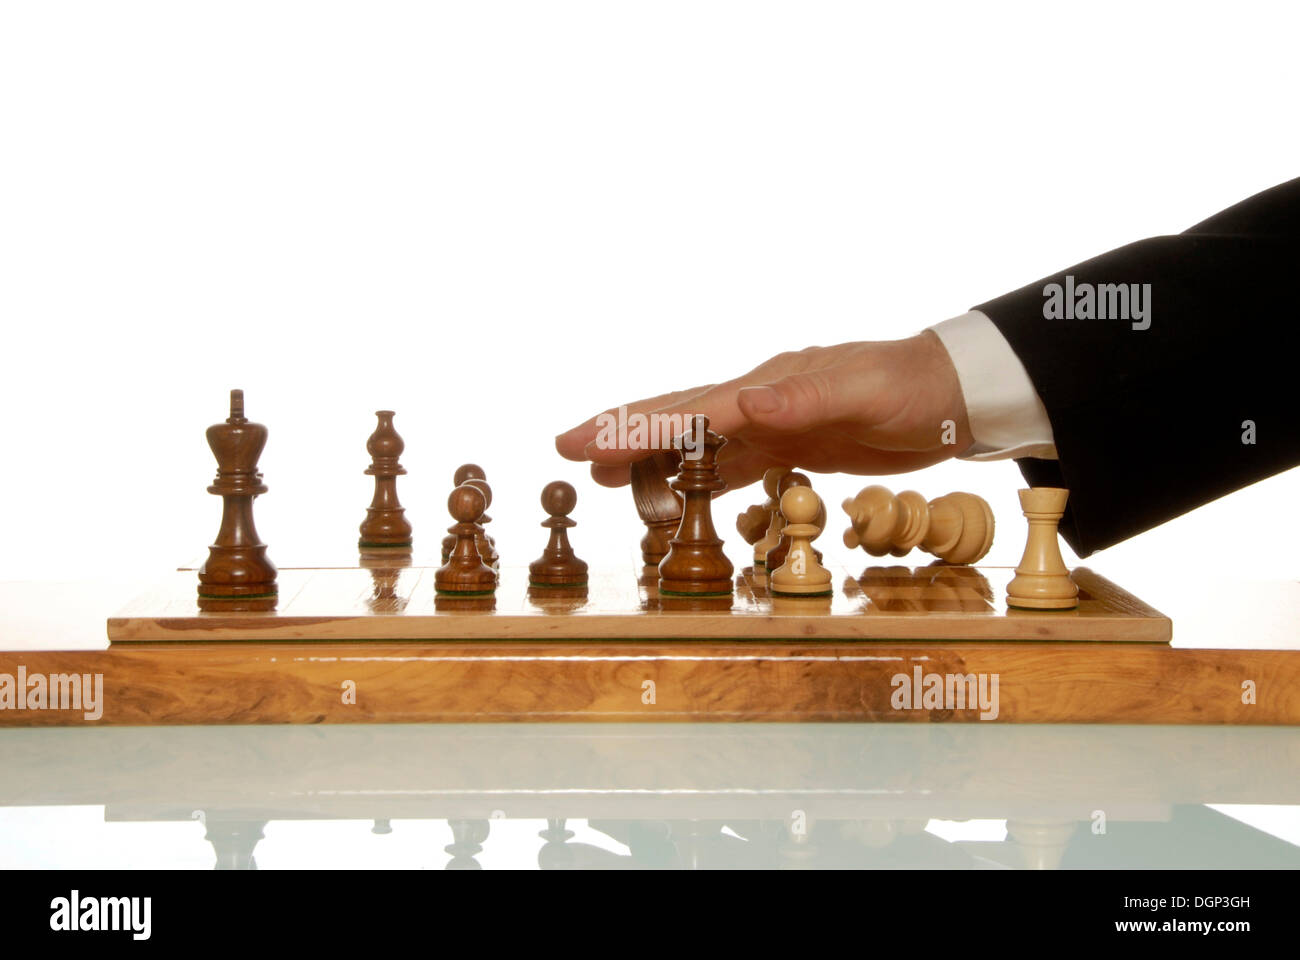 Businessman throwing chess figures around after losing game Stock Photo